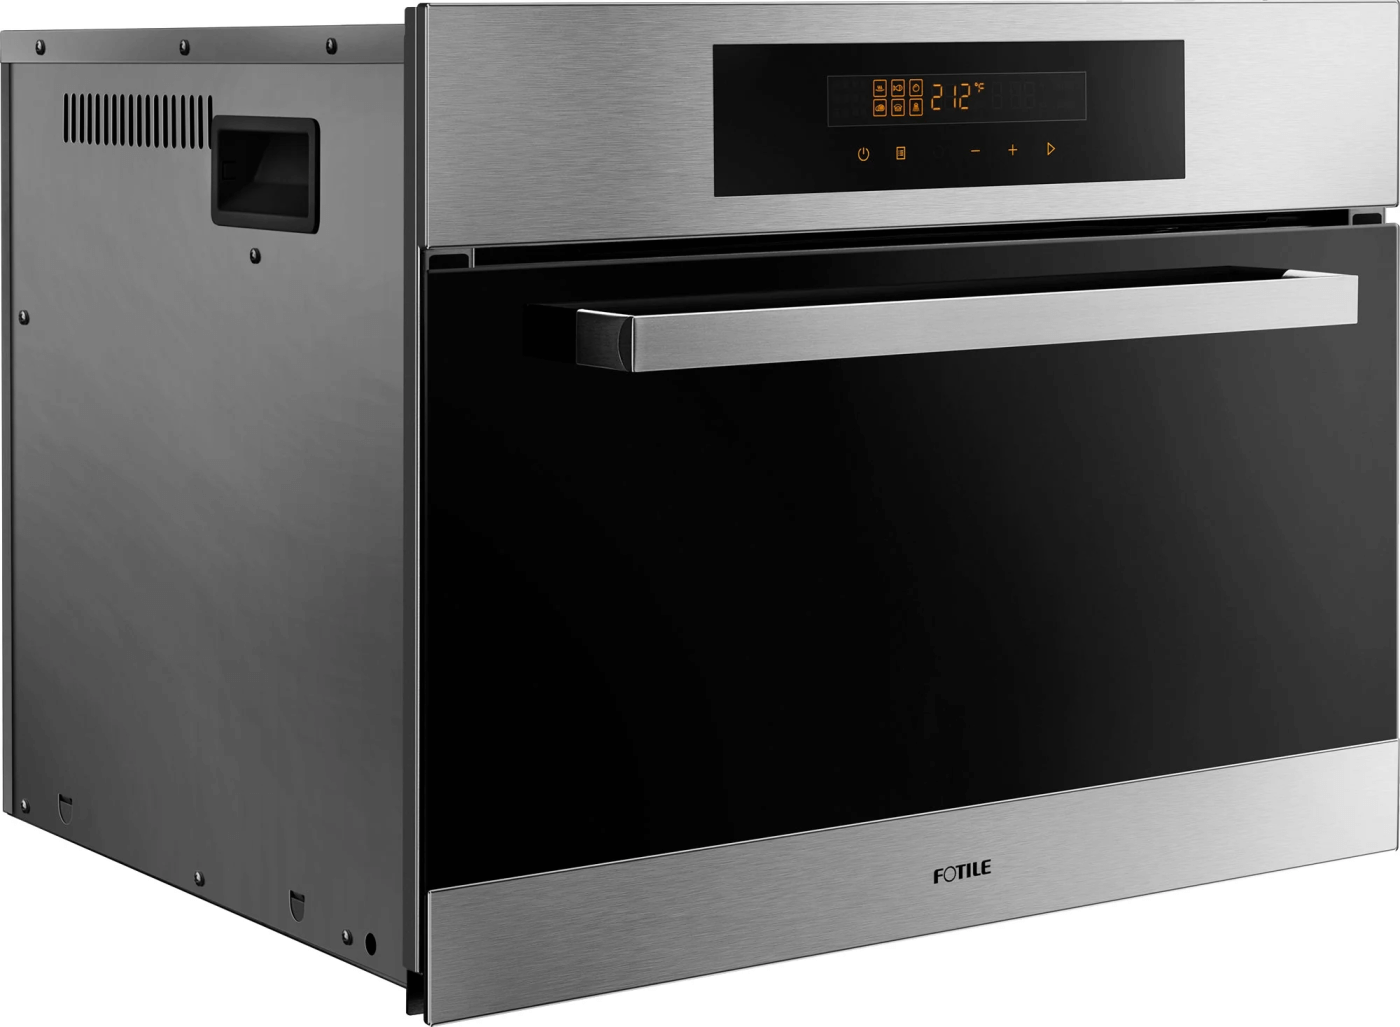 Fotile 24 in. Built-in Steam Oven - white background